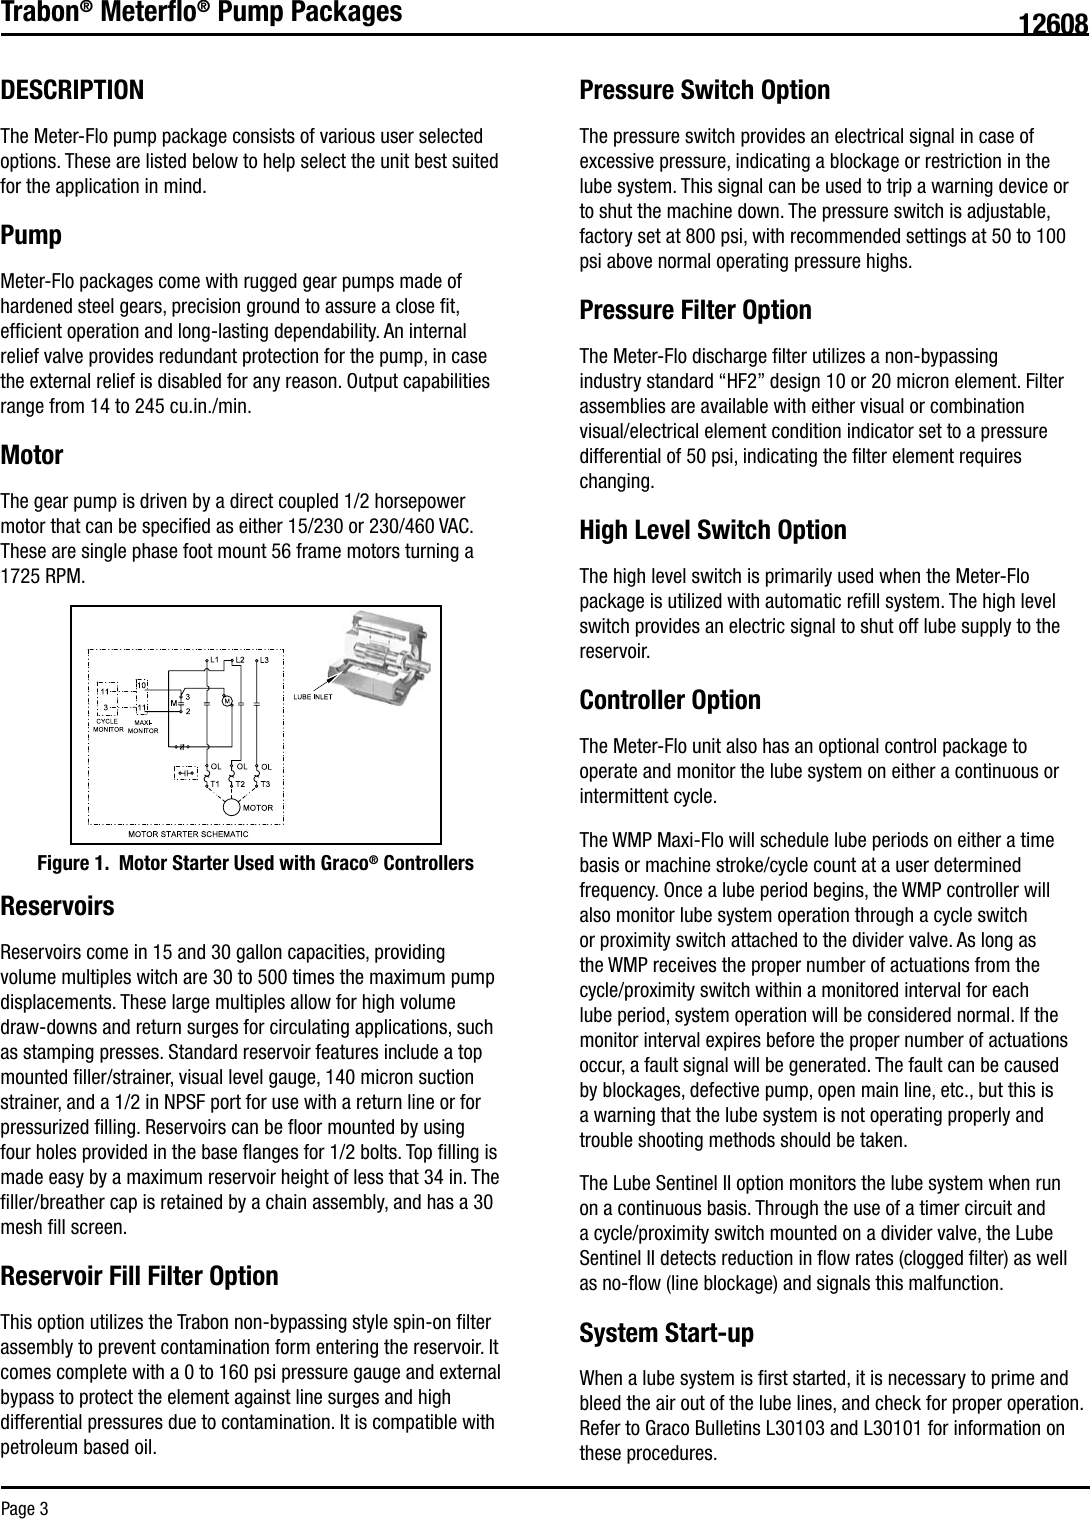 Page 3 of 8 - Graco Graco-Meter-Flo-Pump-Packages-Users-Manual-  Graco-meter-flo-pump-packages-users-manual